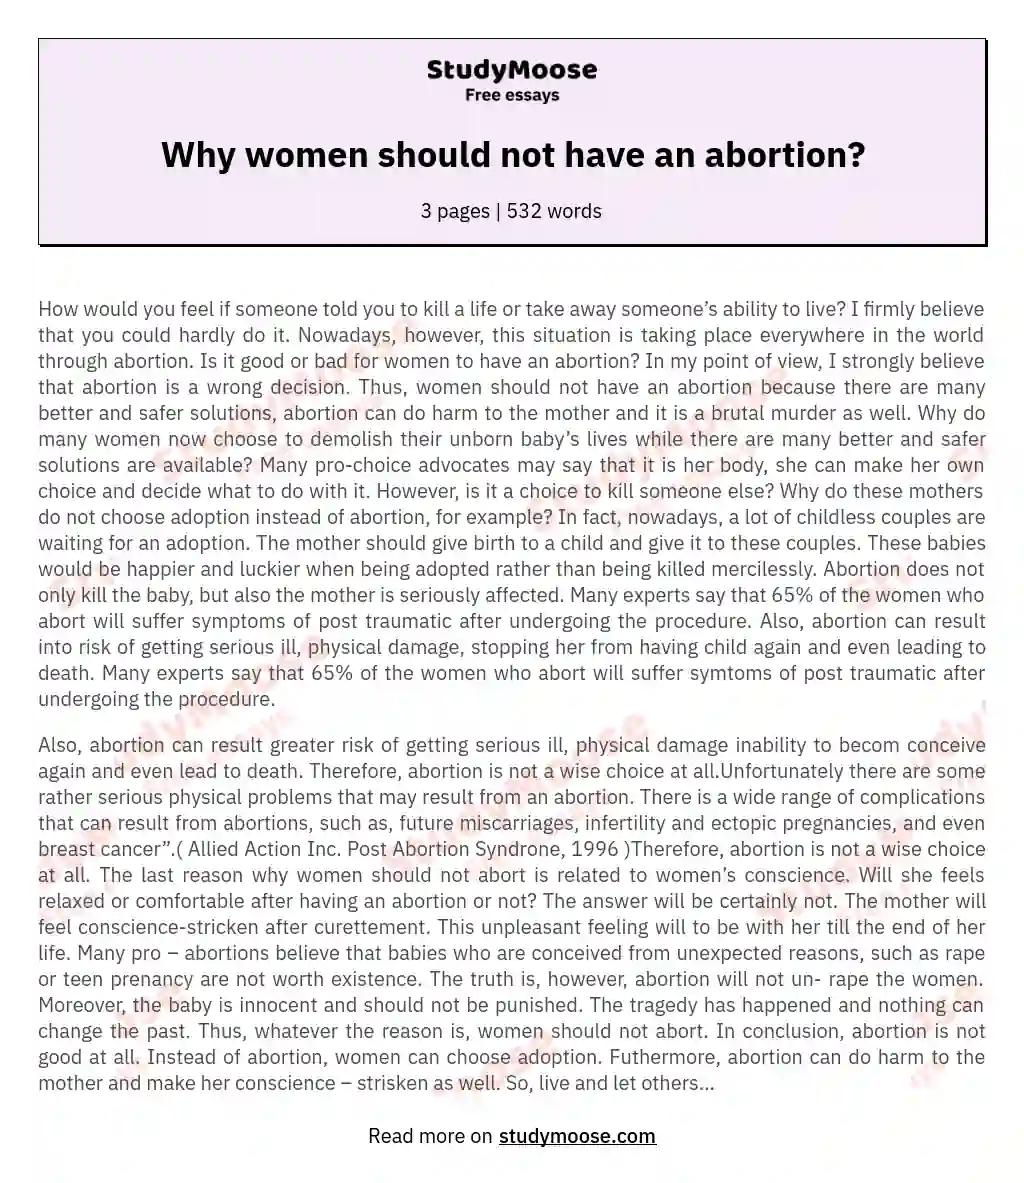 Why women should not have an abortion? essay